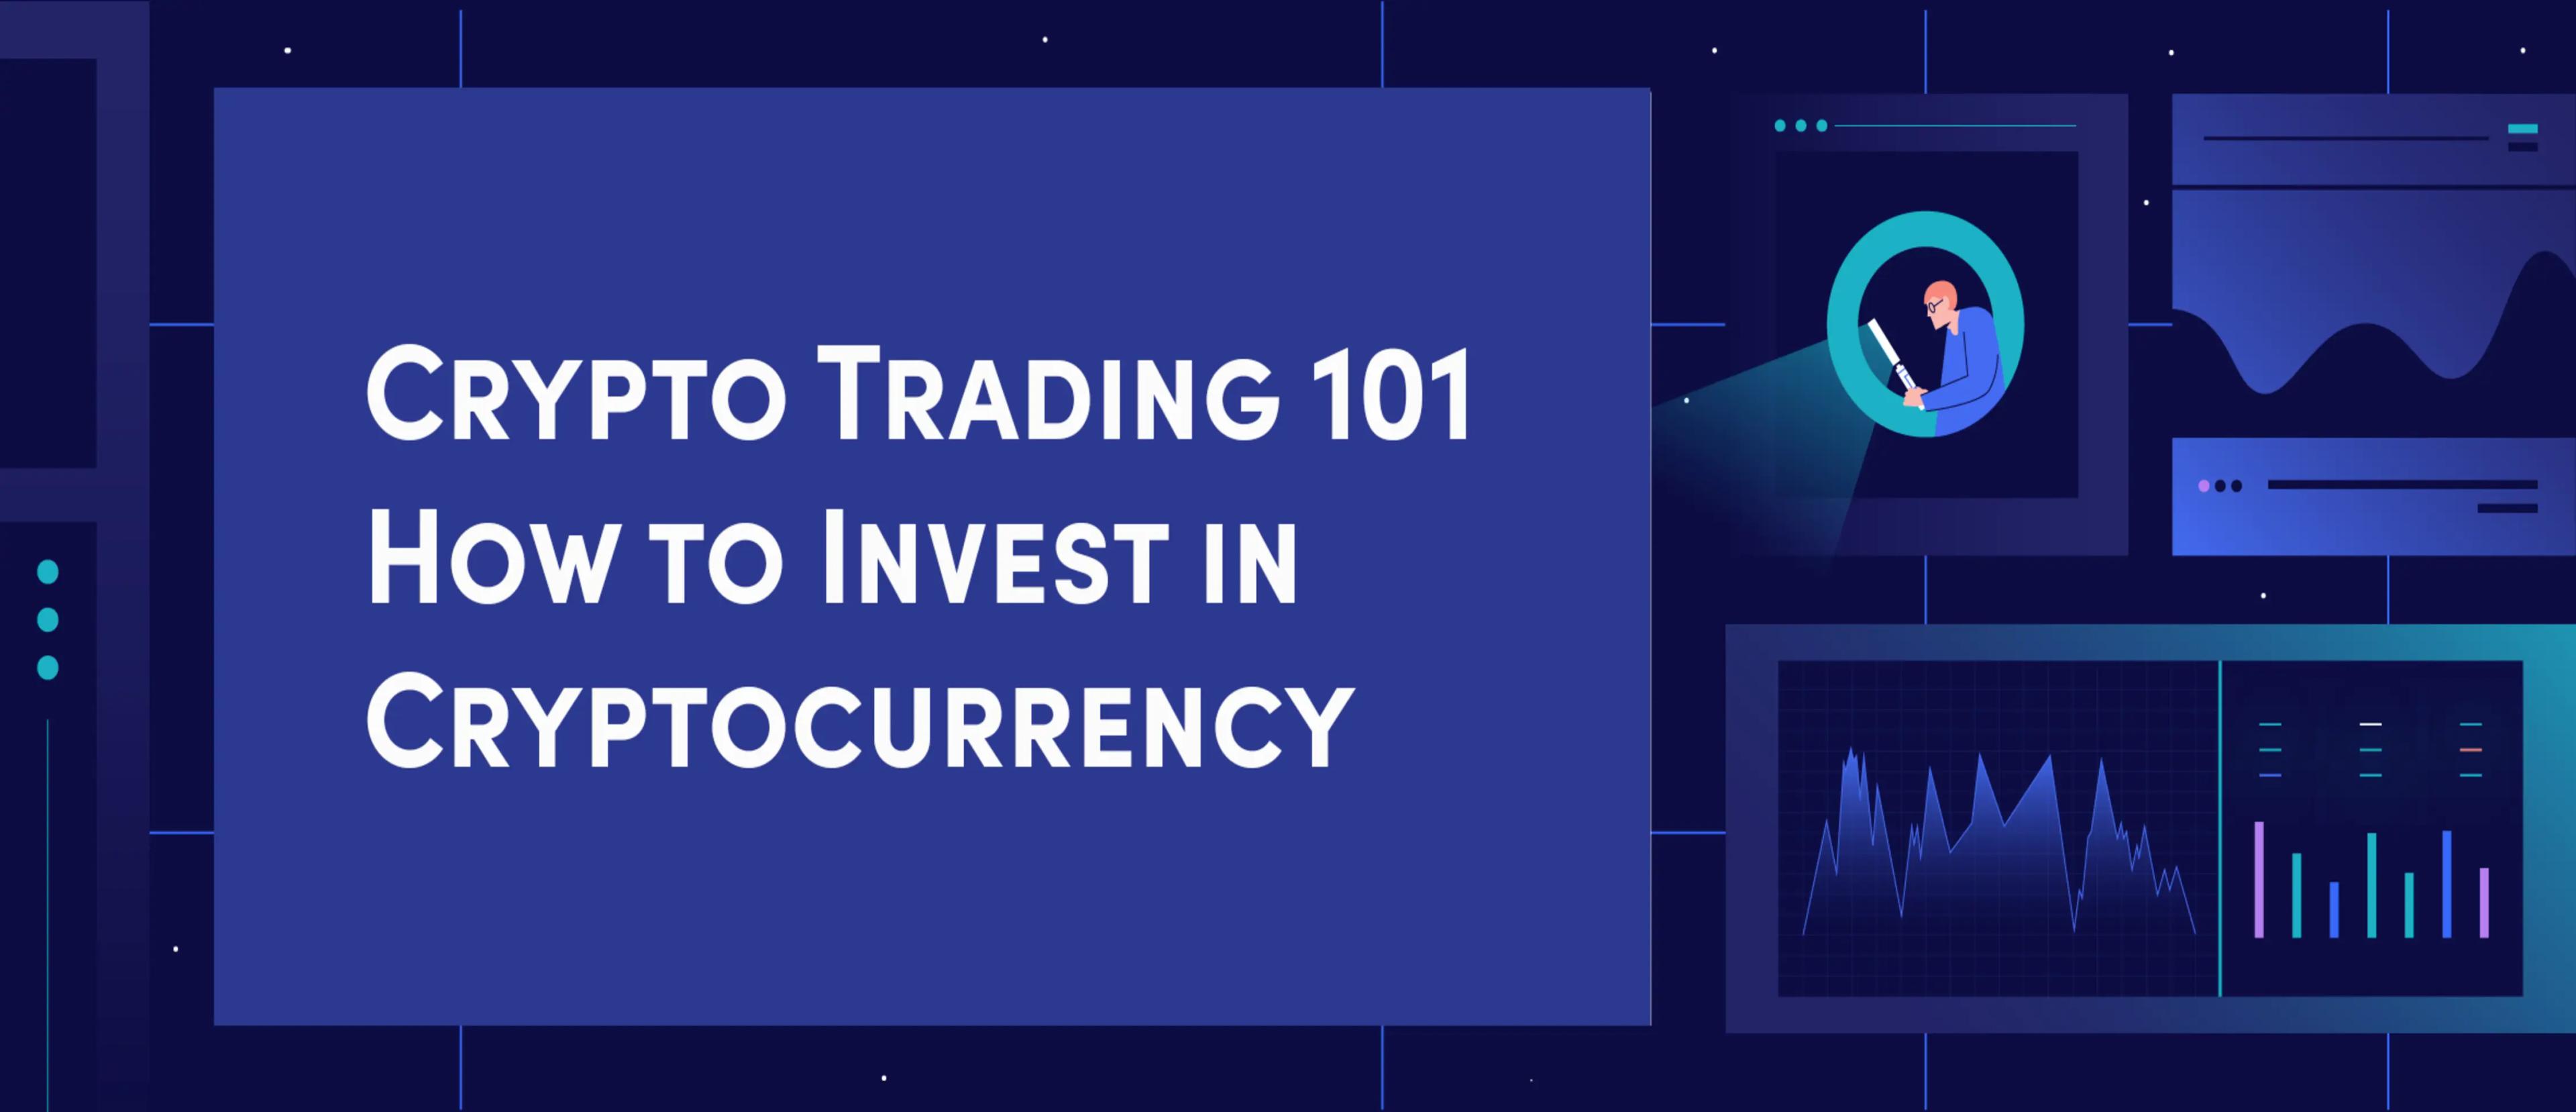 Crypto Trading 101 | How to Invest in Cryptocurrency